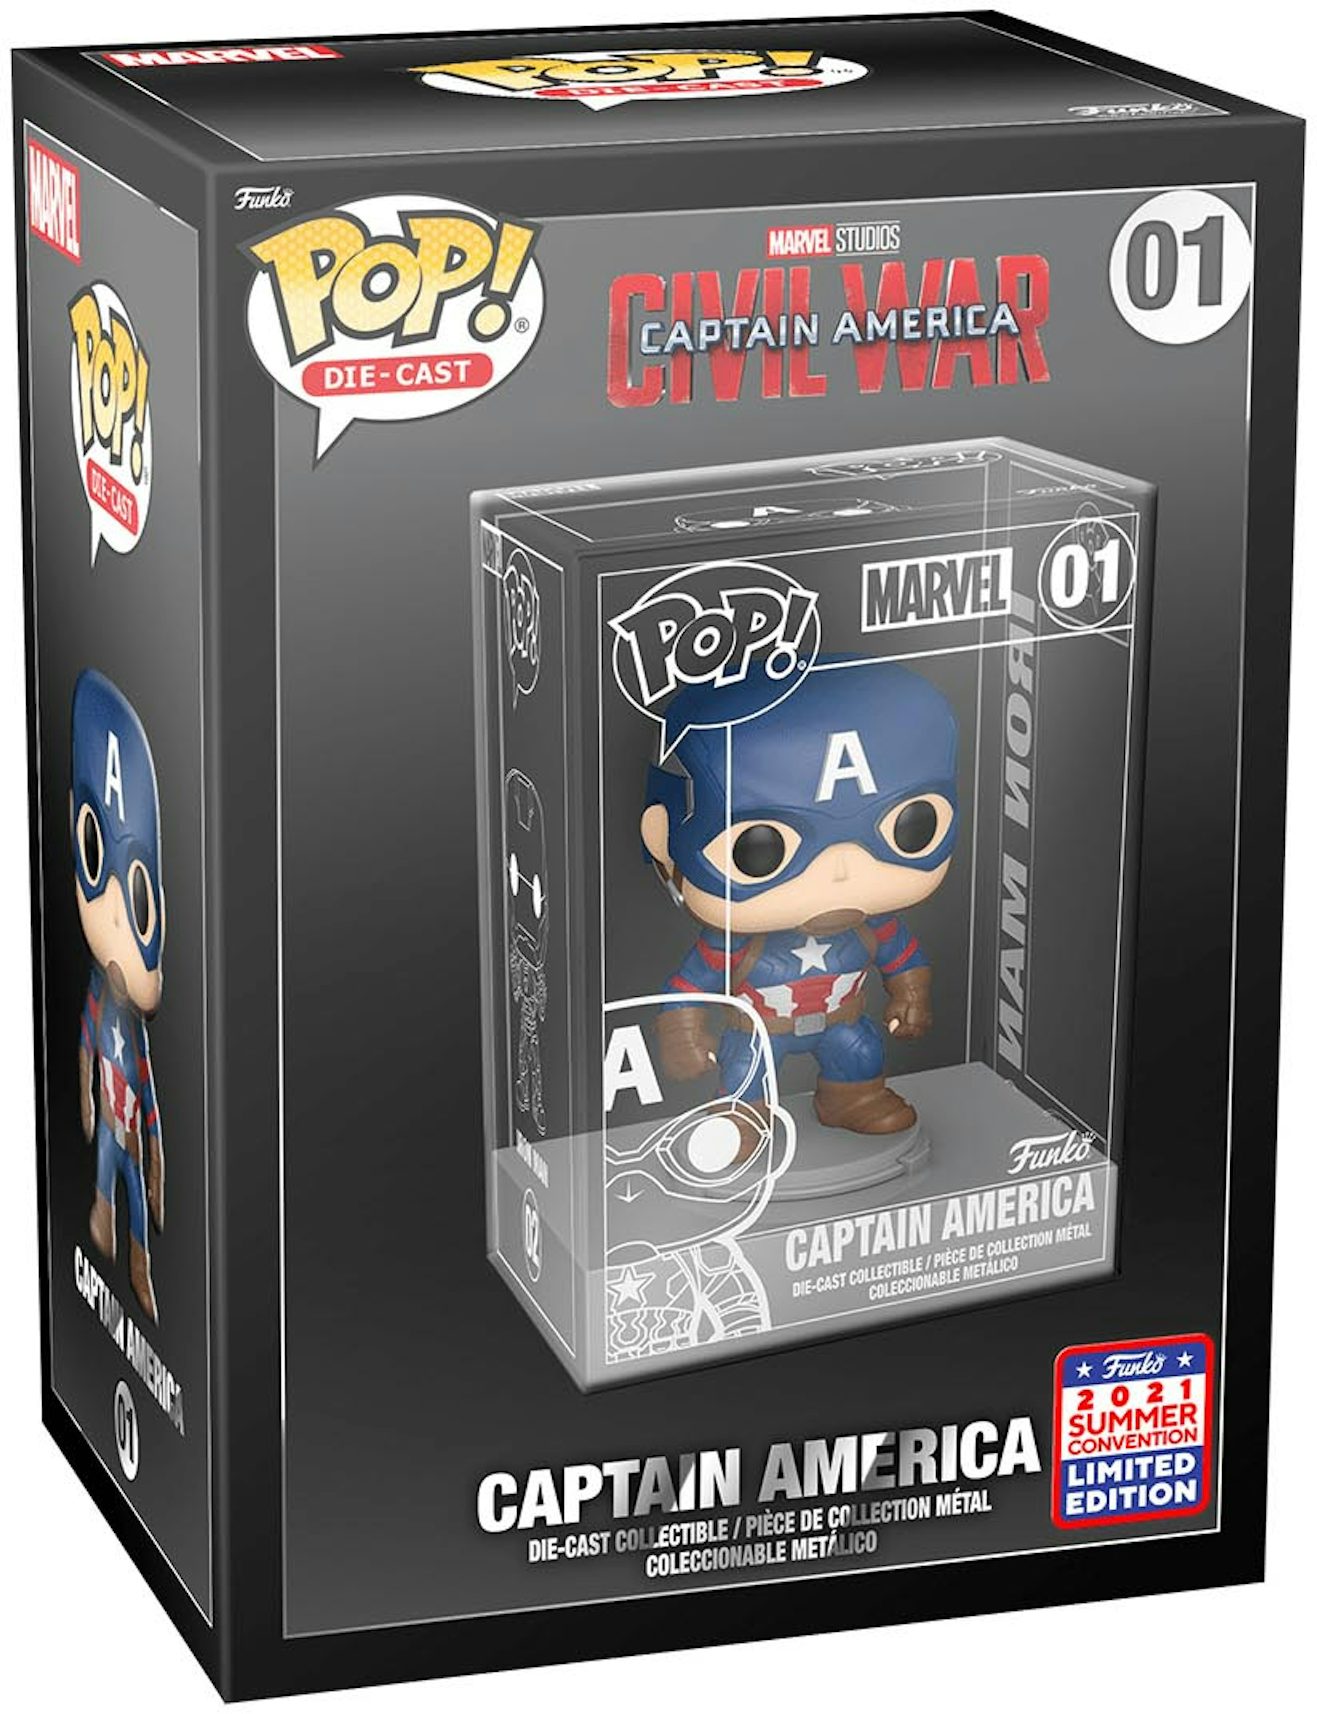 Captain America With Case (Marvel Infinity Saga) Art Series Funko Pop! –  Collector's Outpost